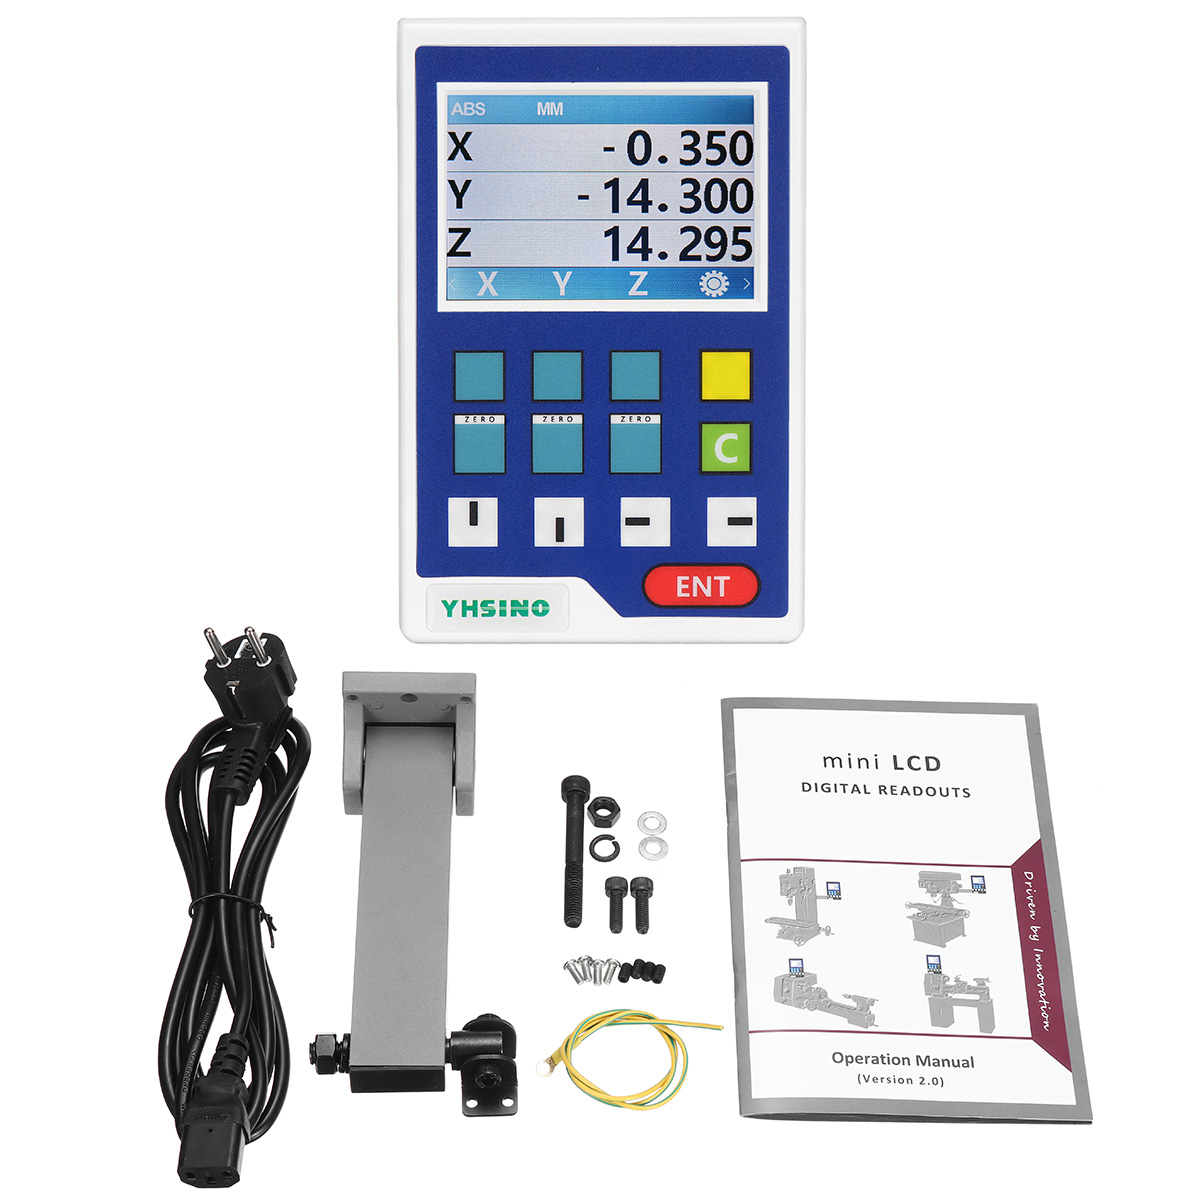 Find YIHAOGD YH LCD 3 Axis Grating CNC Milling Digital Readout Display DRO / KA300 5Î¼m TTL 70-1020mm Electronic Linear Scale Encoders Lathe Tool for Sale on Gipsybee.com with cryptocurrencies